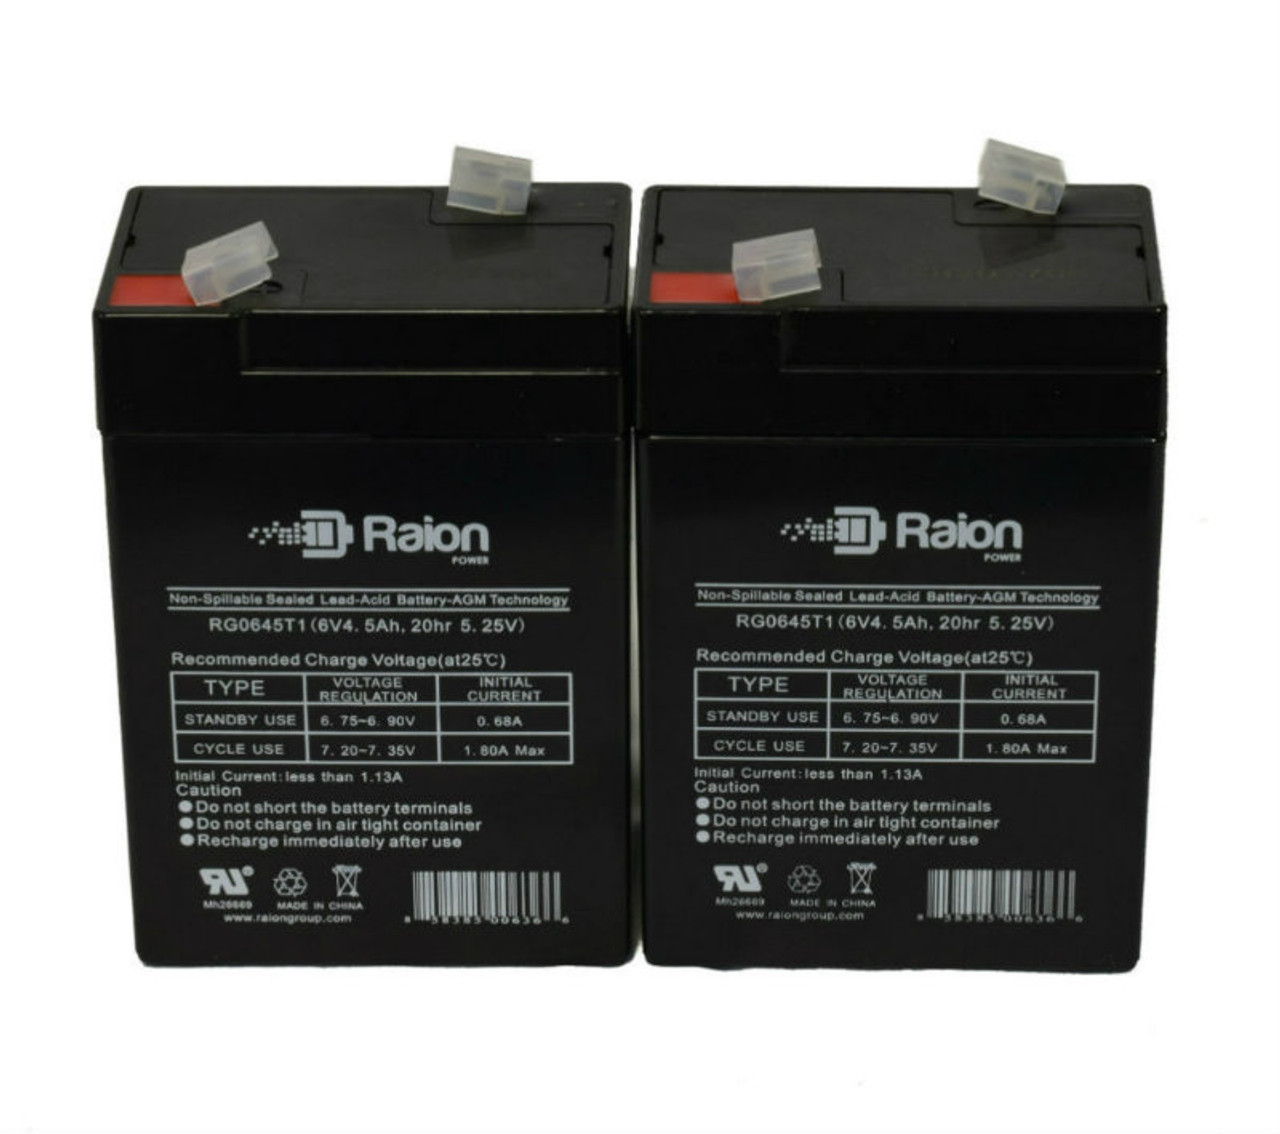 Raion Power RG0645T1 6V 4.5Ah Replacement Medical Equipment Battery for Abbott Laboratories Life Care 75 Breeze - 2 Pack